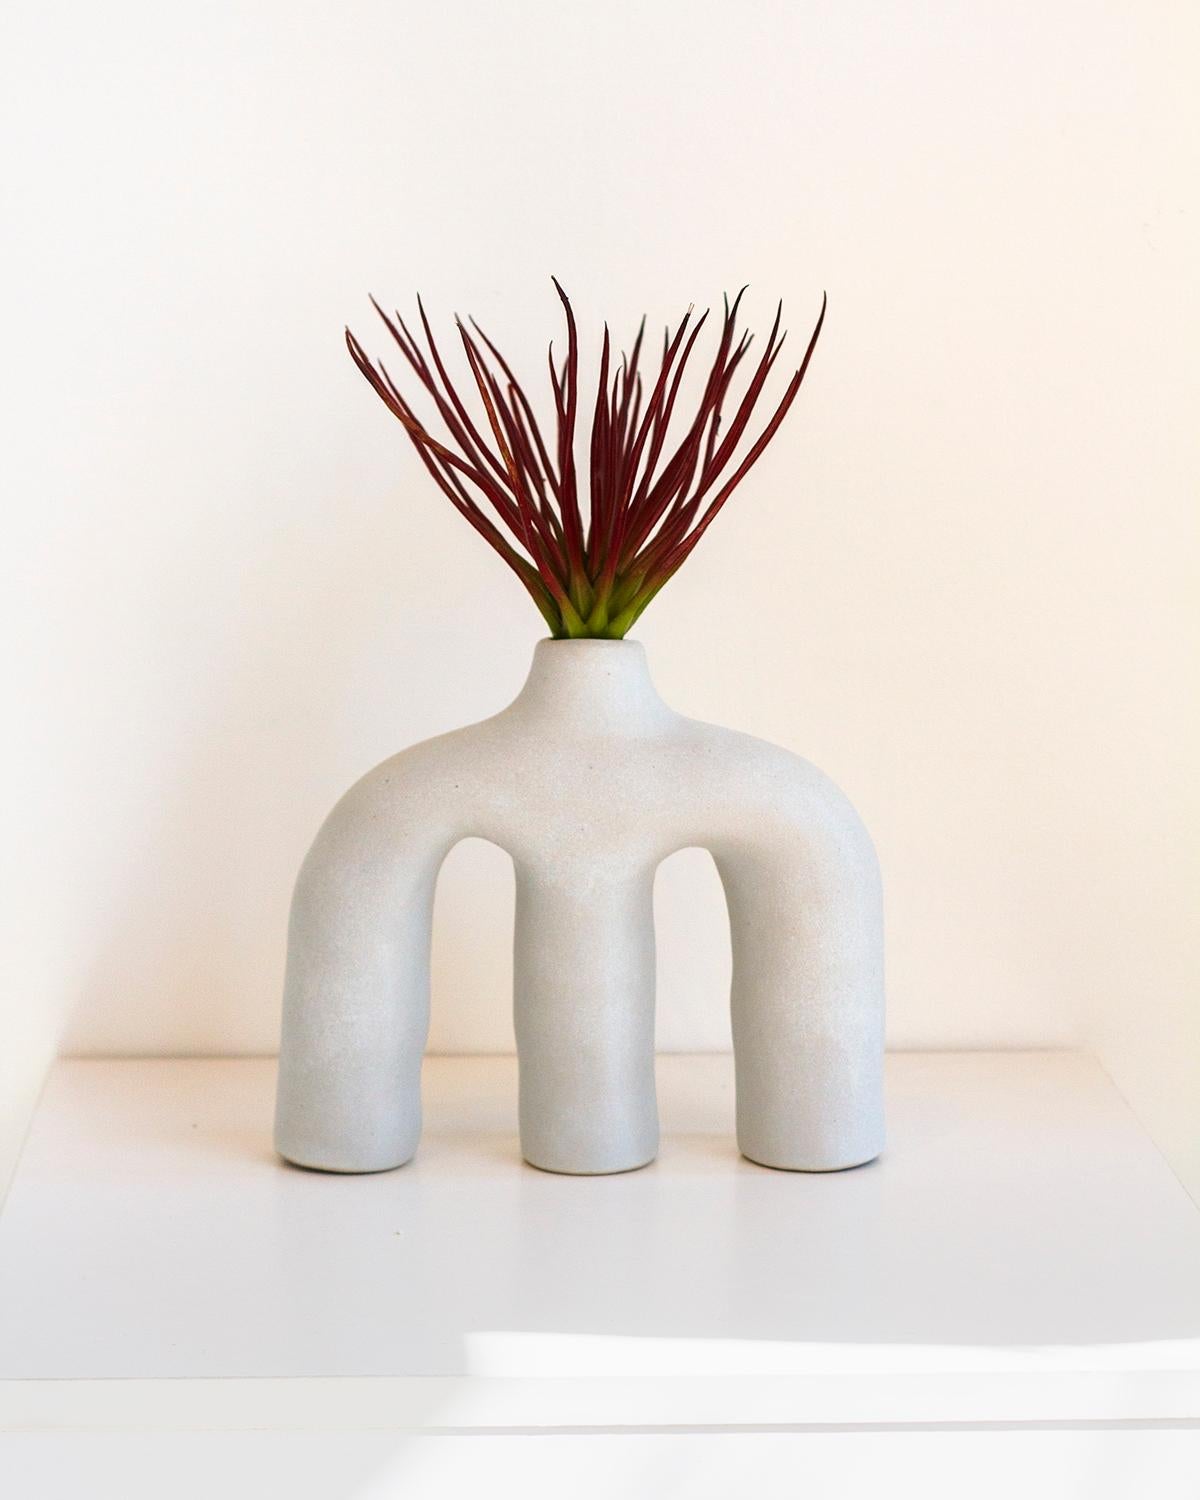 This uniquely beautiful clay vase has three feet and one small opening in the top for flowers or branches. It was handmade in an organic modern style to fit into any contemporary home with a touch of quiet luxury. 

Only one of each design and color